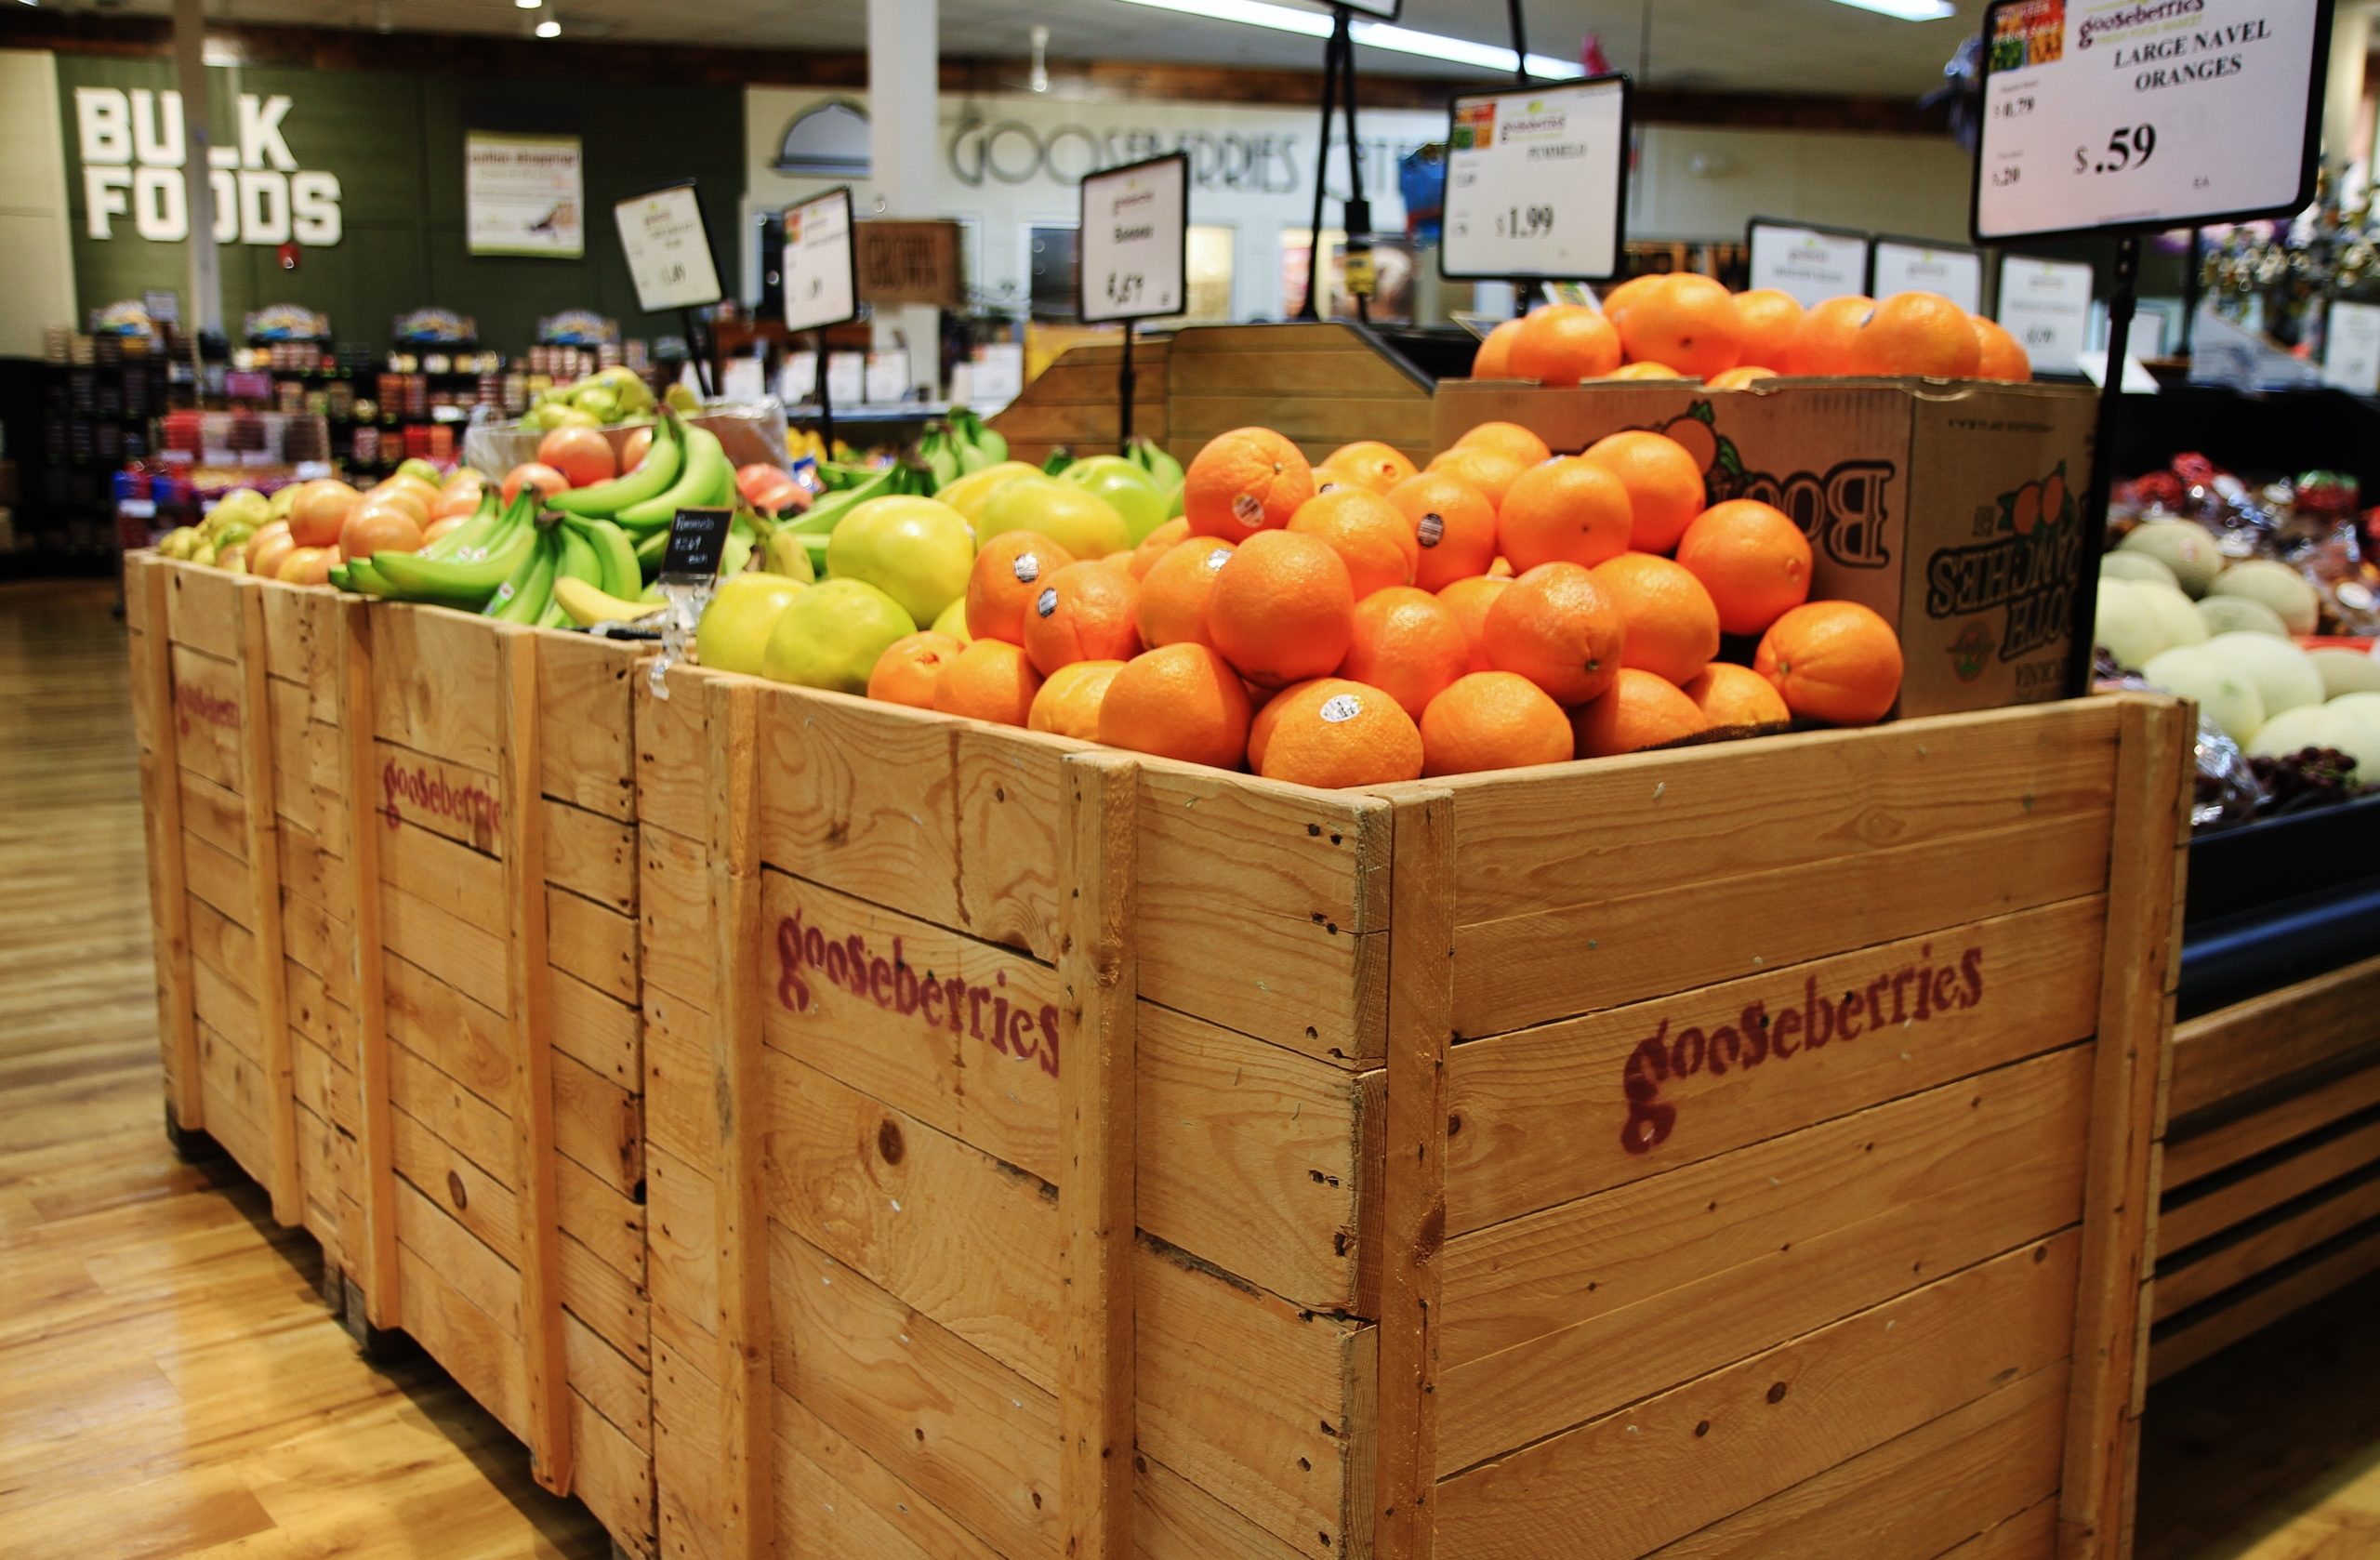 Gooseberries greatest strength is exceptional produce so StoreMasters made this a feature department front and center